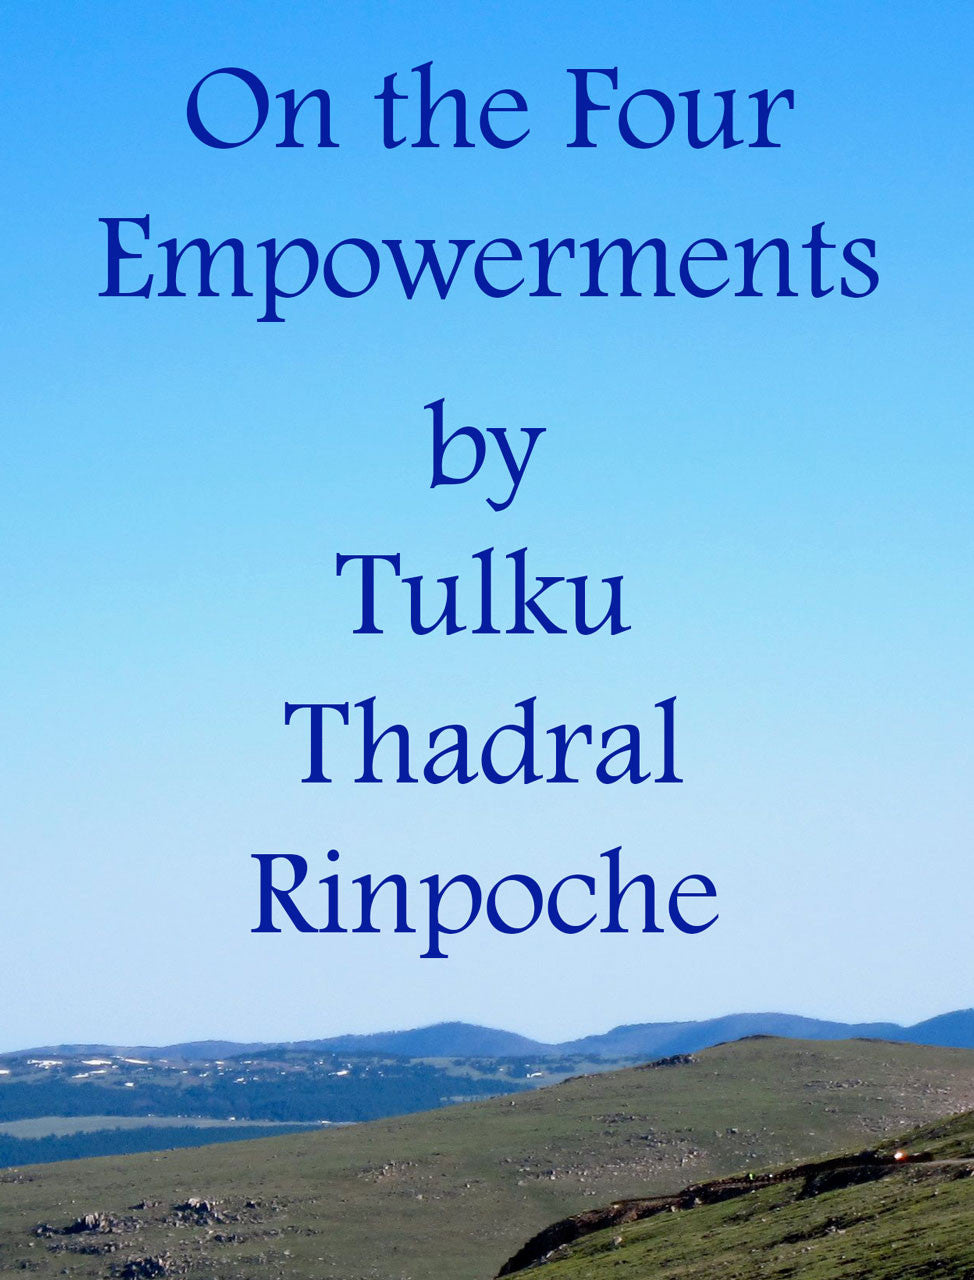 (DIG AUDIO) On the Four Empowerments - Teachings by Tulku Thadral Rinpoche